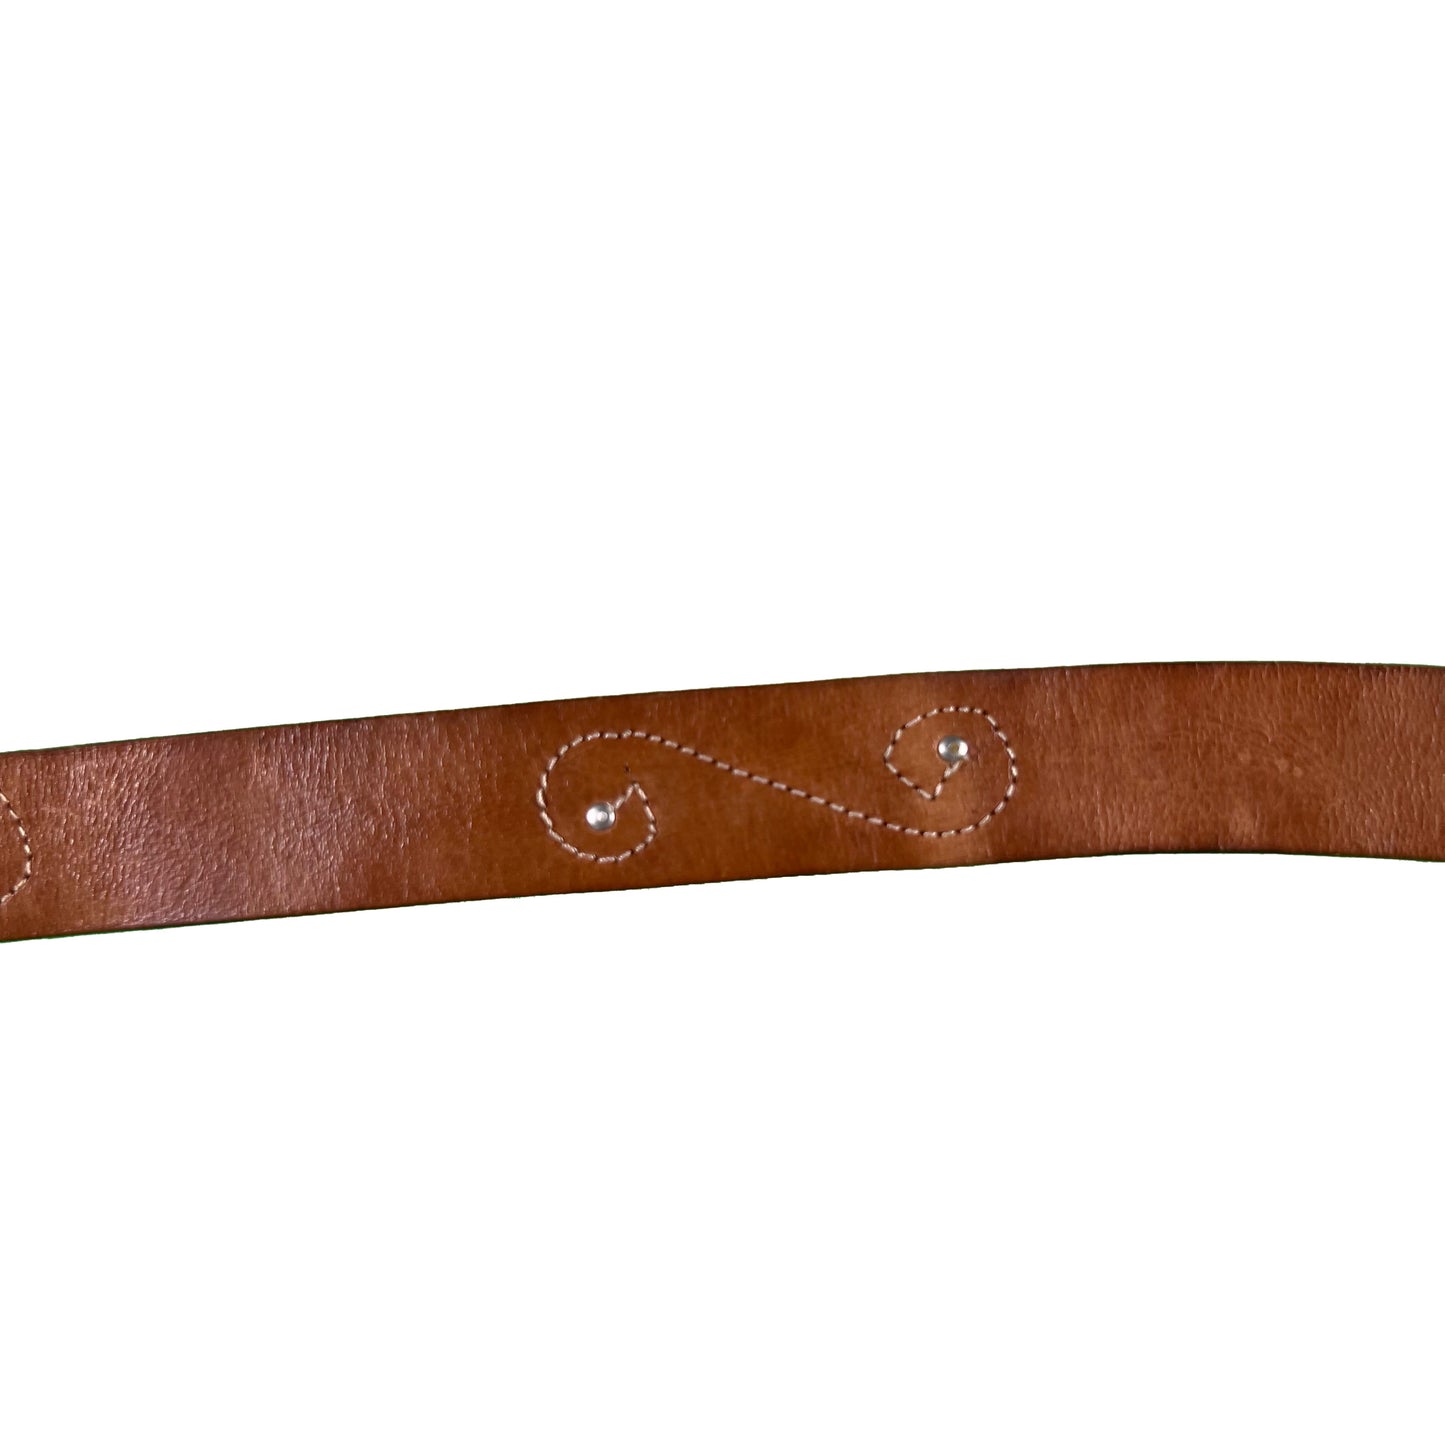 70s Studded and Stitched Leather Belt- 30"-34"